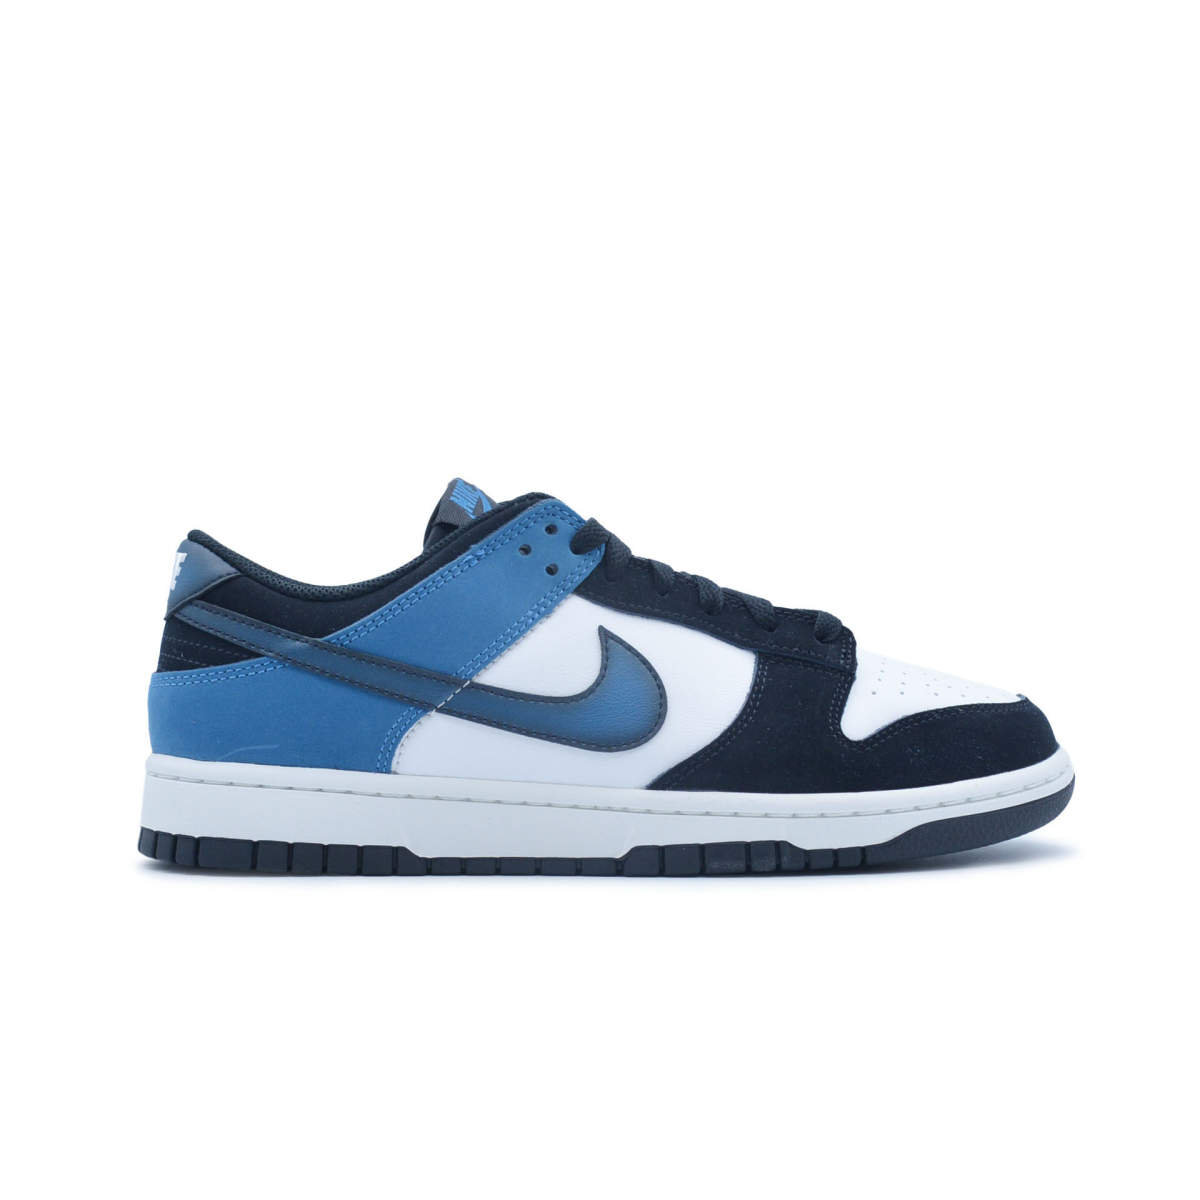 Dunk low industrial blue